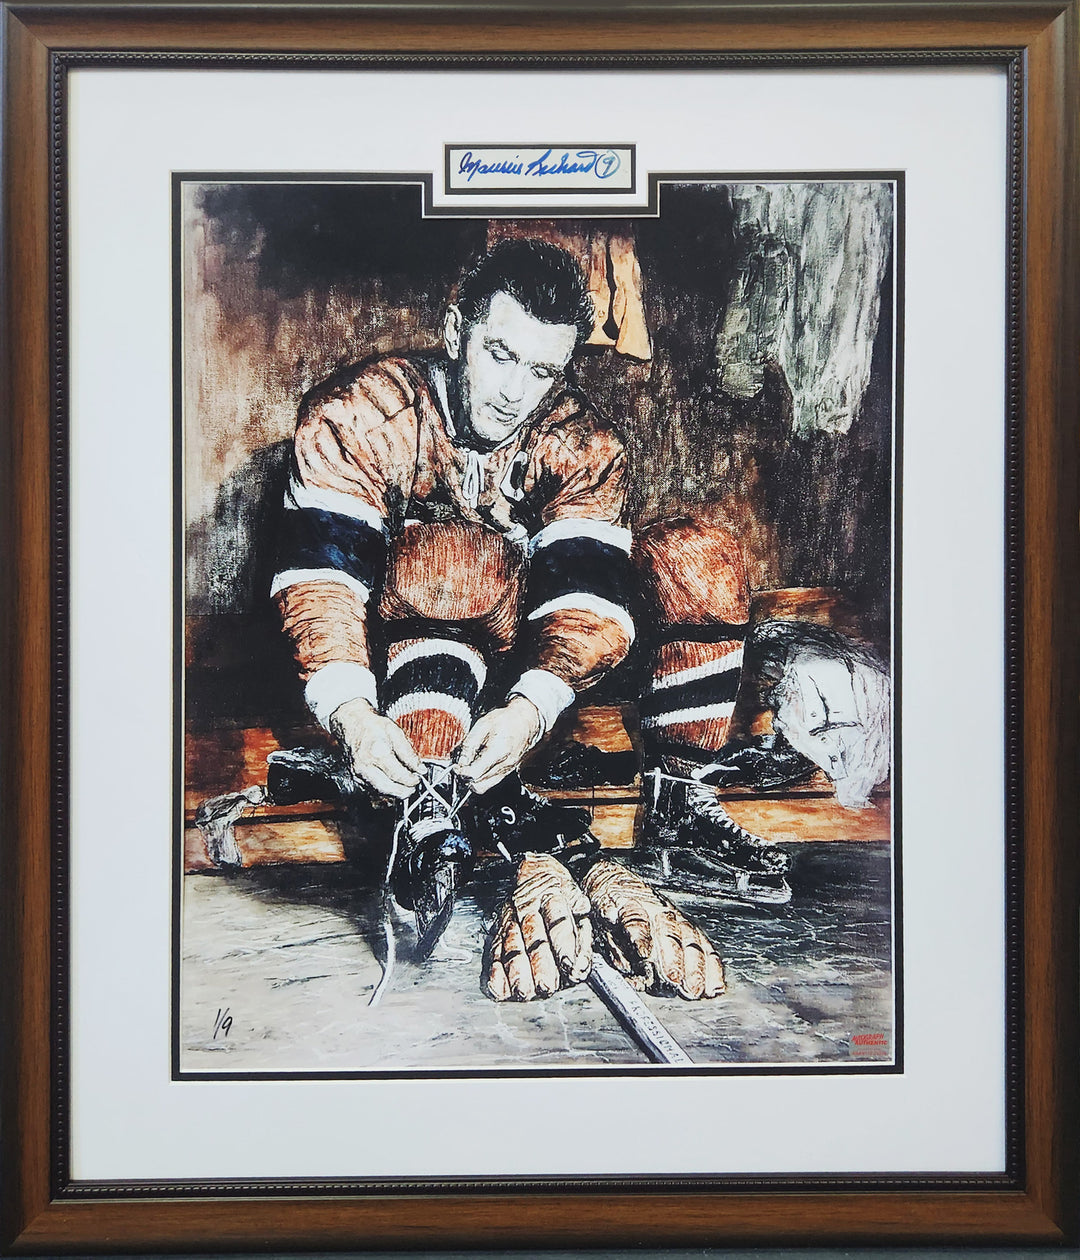 Maurice Richard Autographed Limited Edition #1 Of 9 Frame Montreal Canadiens, Montreal Canadiens, NHL, Hockey, Autographed, Signed, AACMH33229